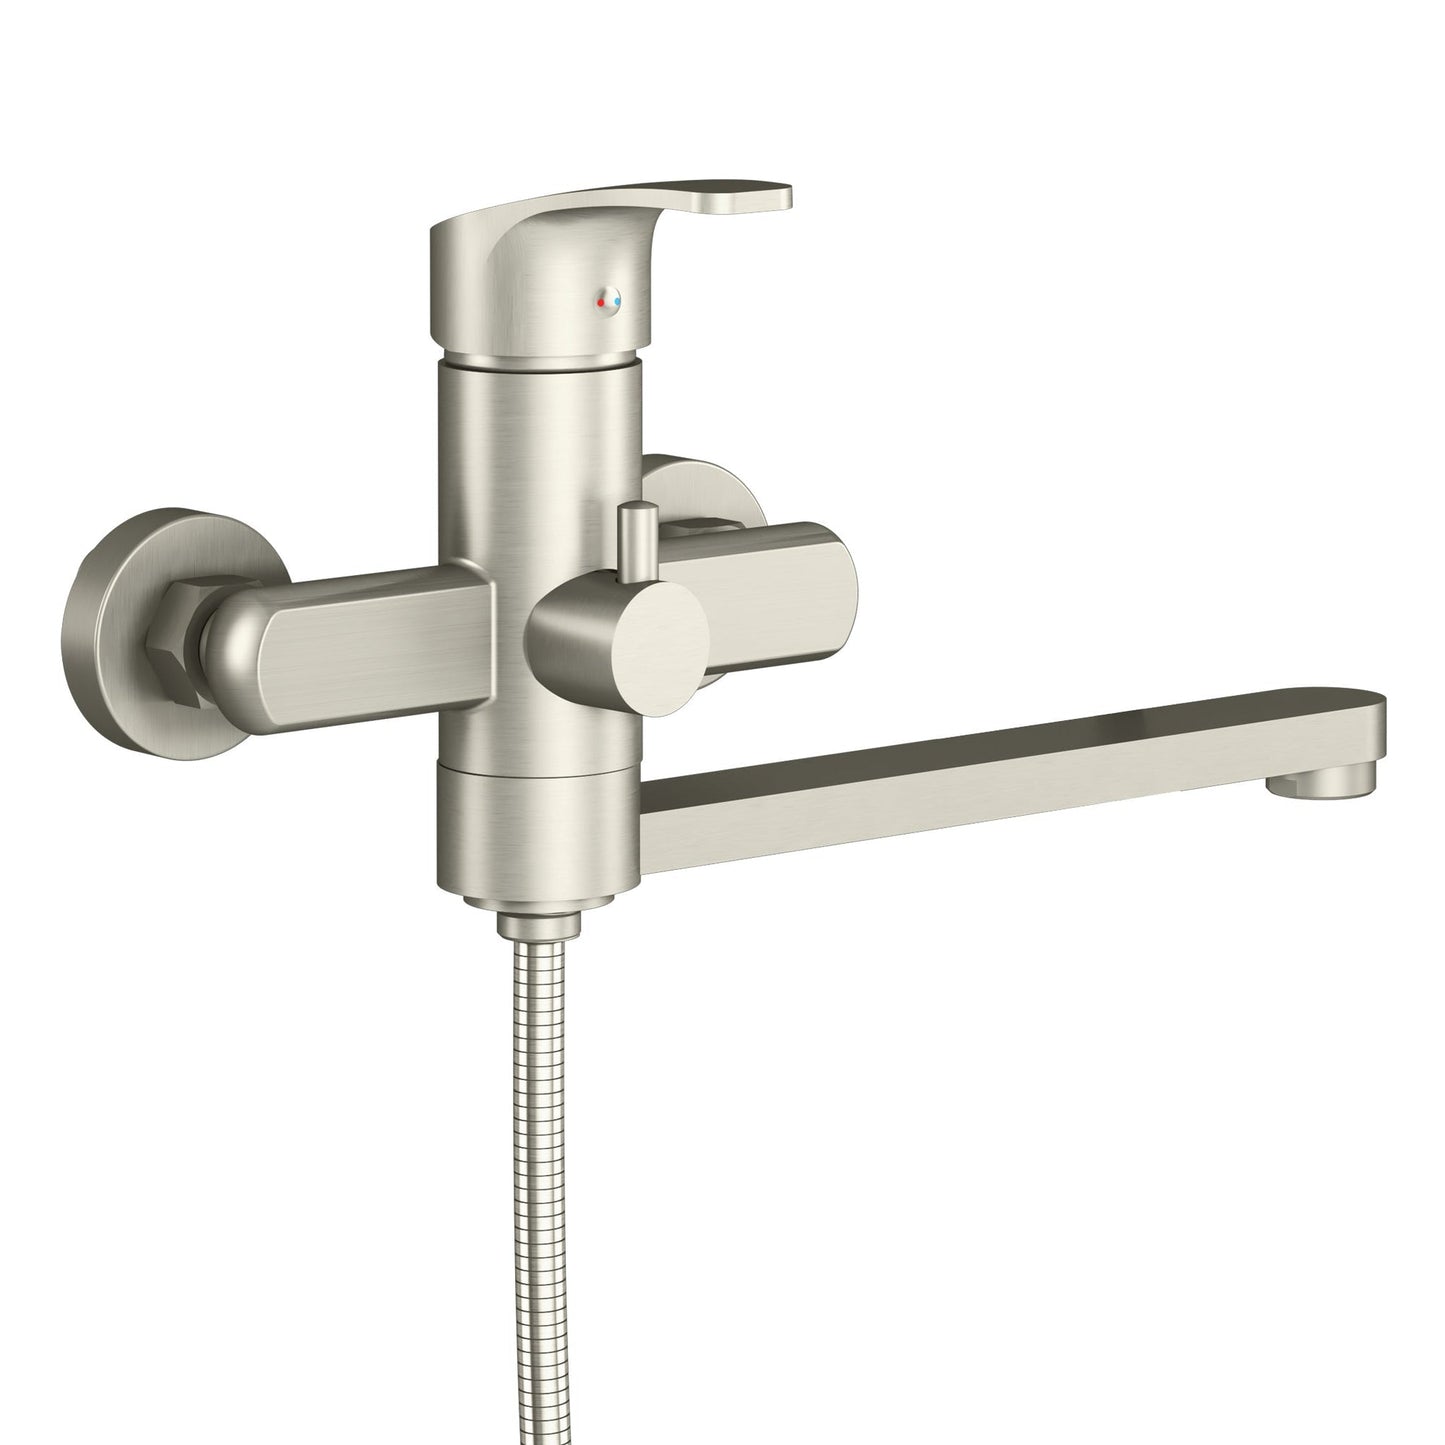 PULSE ShowerSpas Niagra Wall Mounted High Flow Tub Filler in Brushed Nickel Finish With Single Function Hand Shower